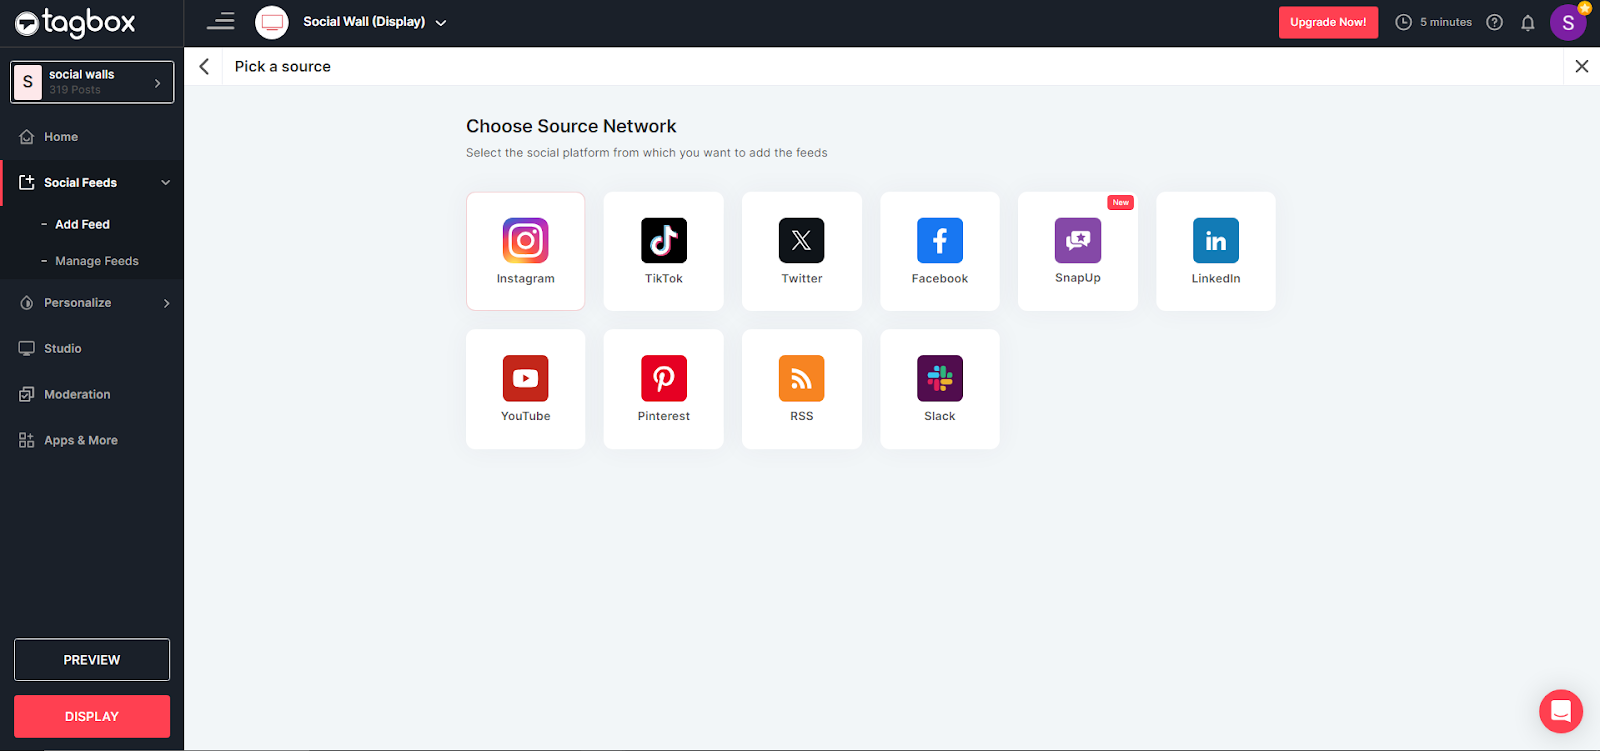 source networks for create social wall